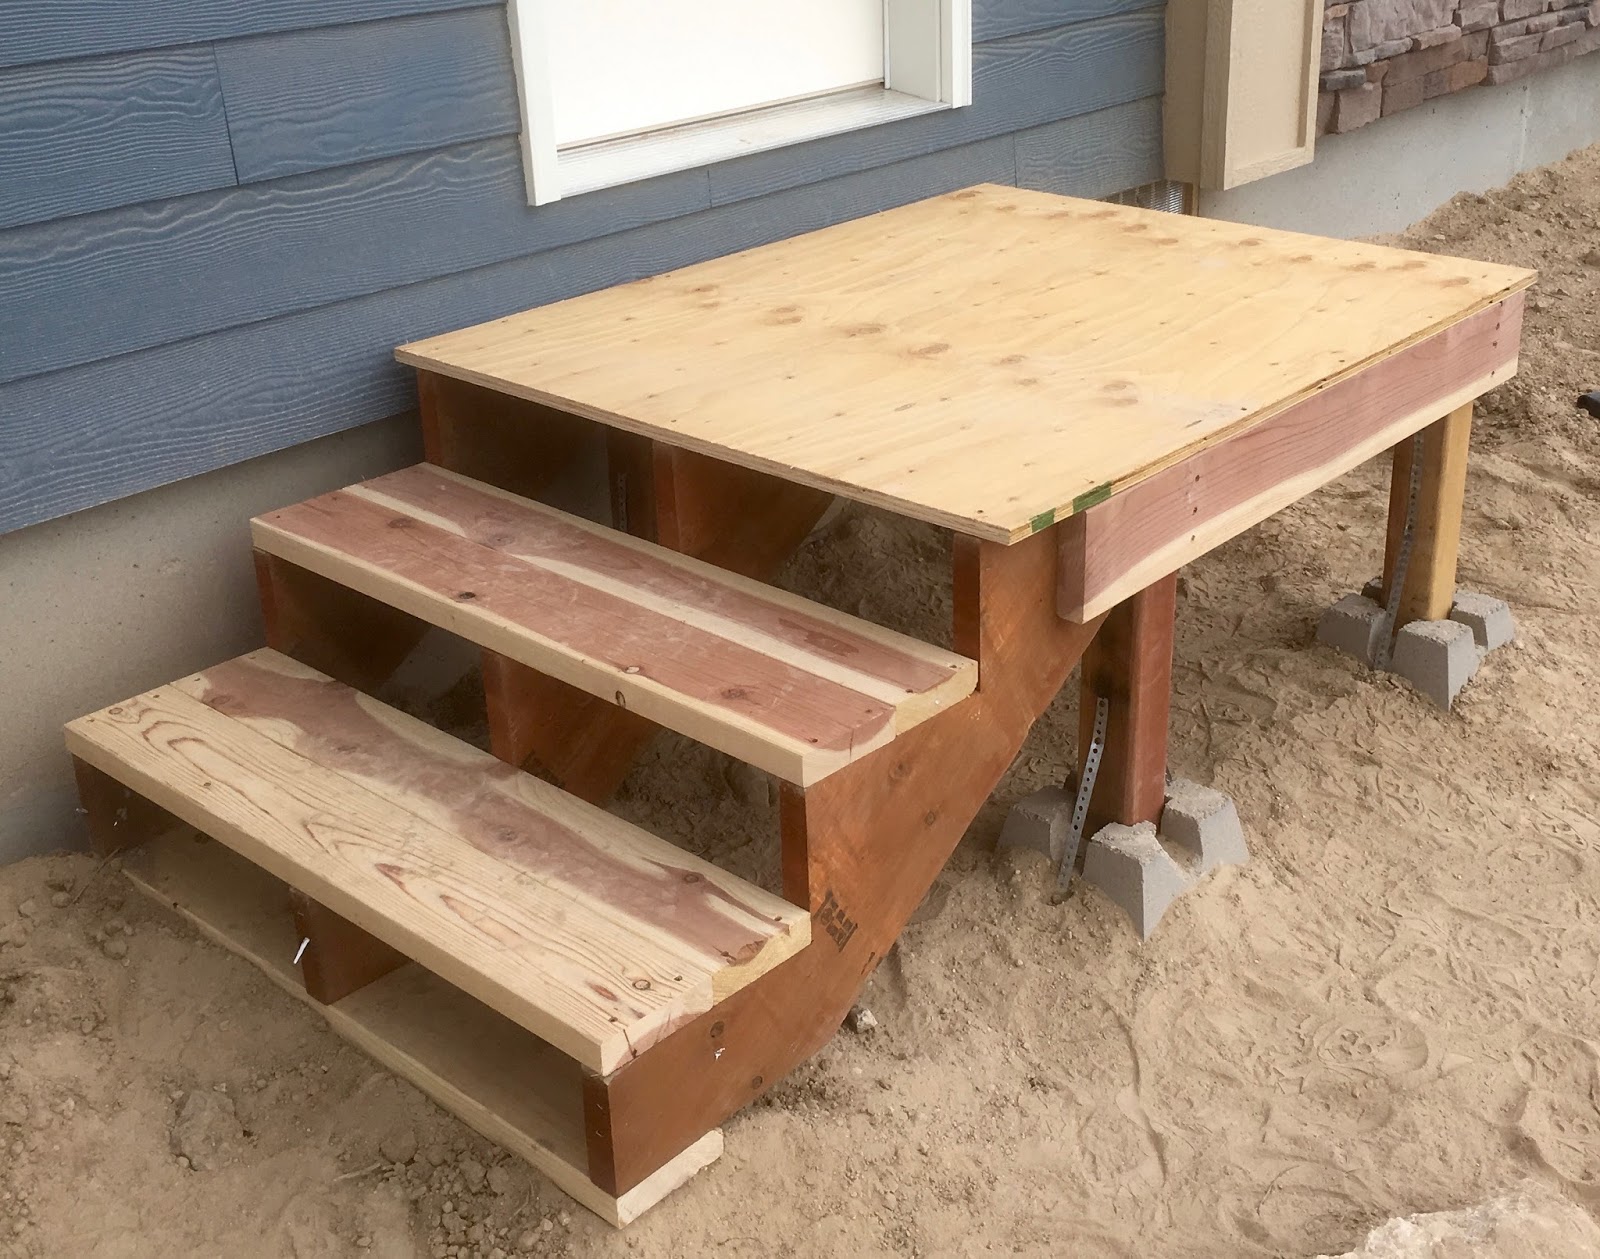 Syonyk's Project Blog: Building Temporary Stairs with redwood